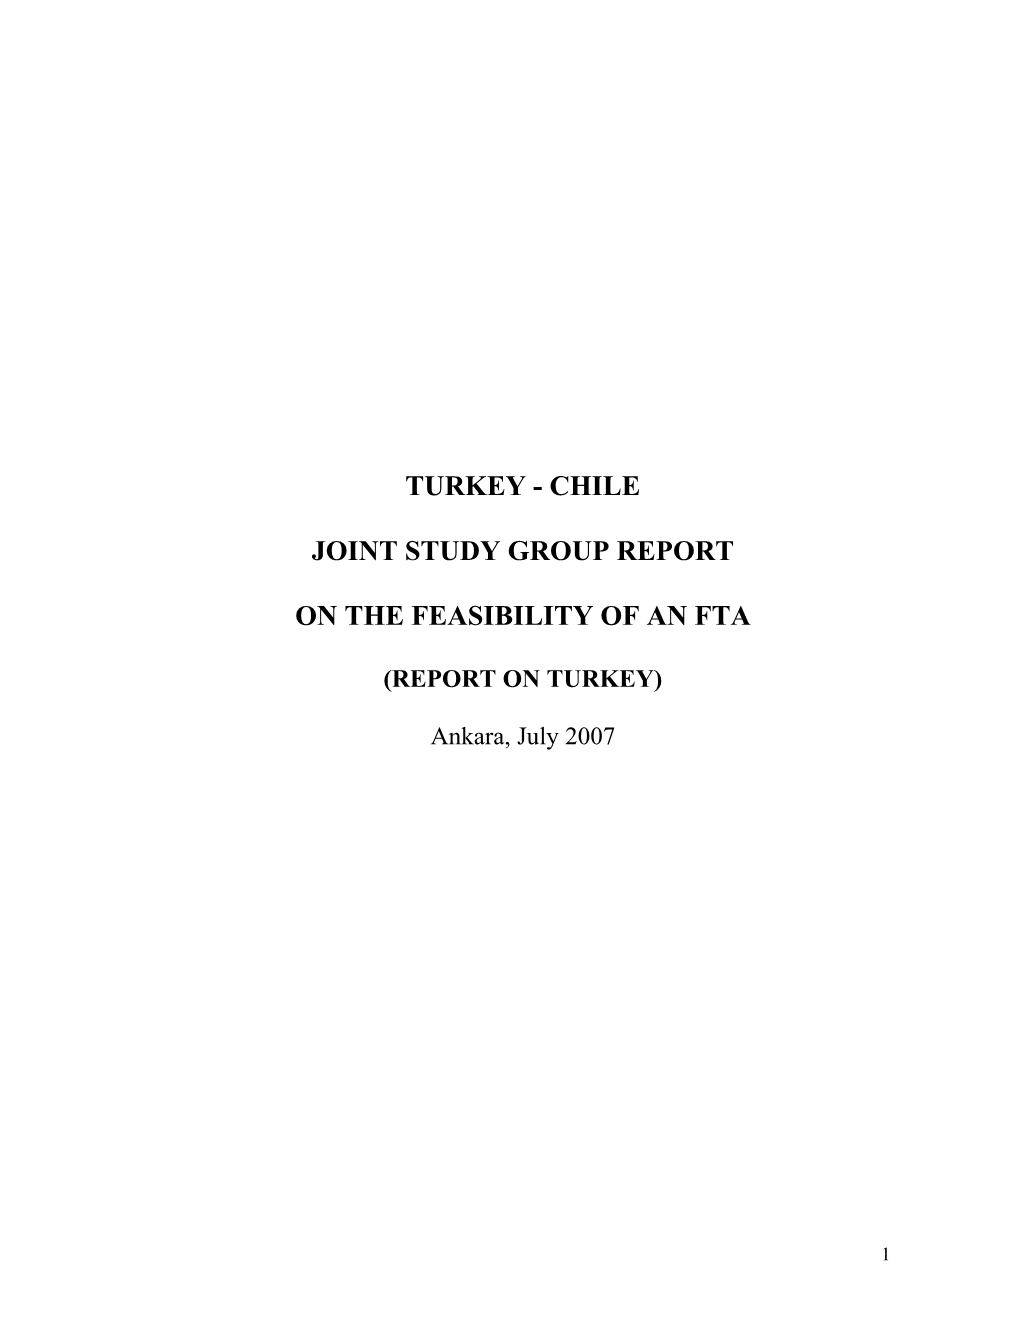 Chile Joint Study Group Report on the Feasibility of An